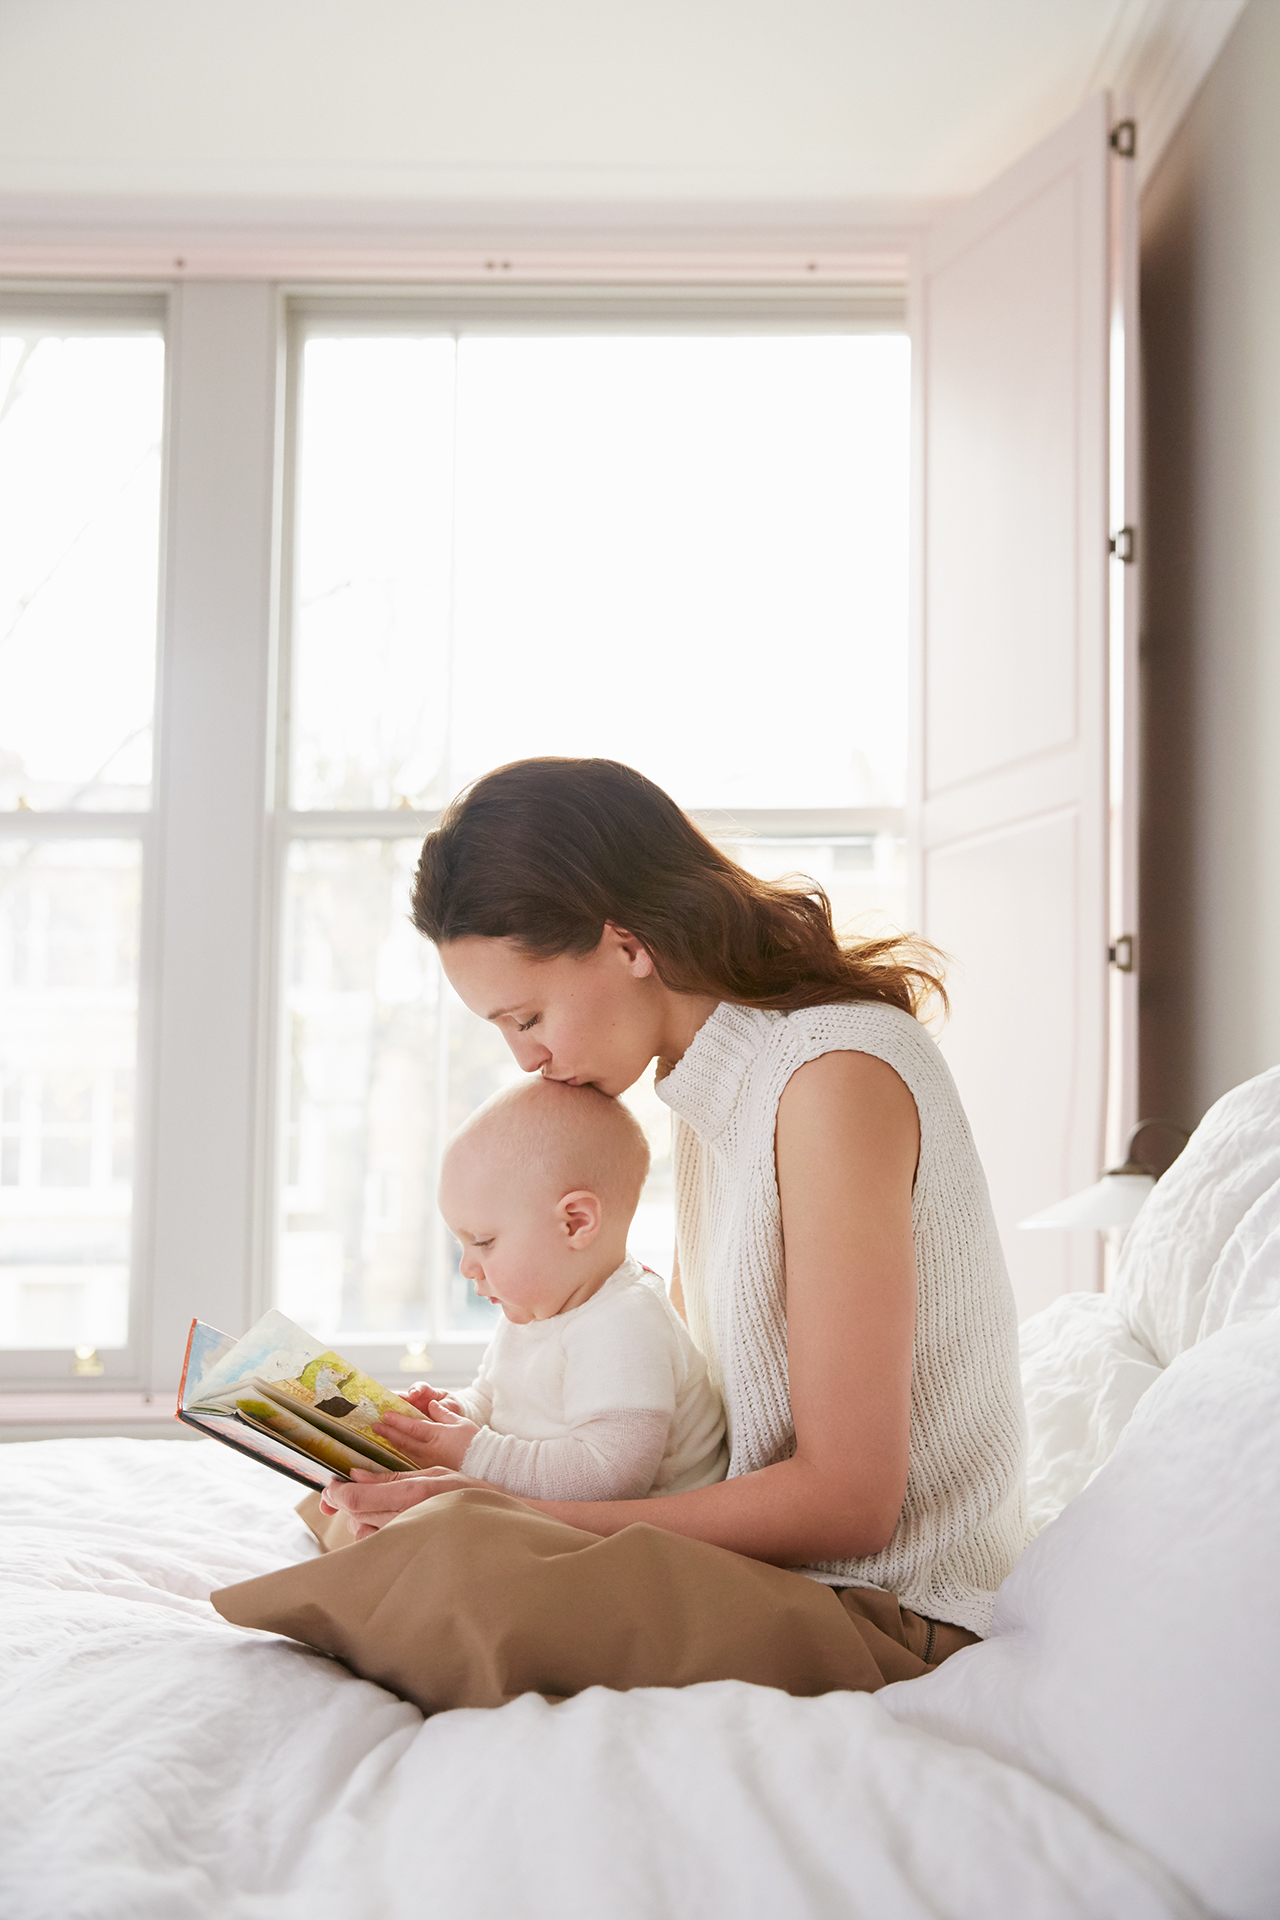 Mummy reading with baby in bed